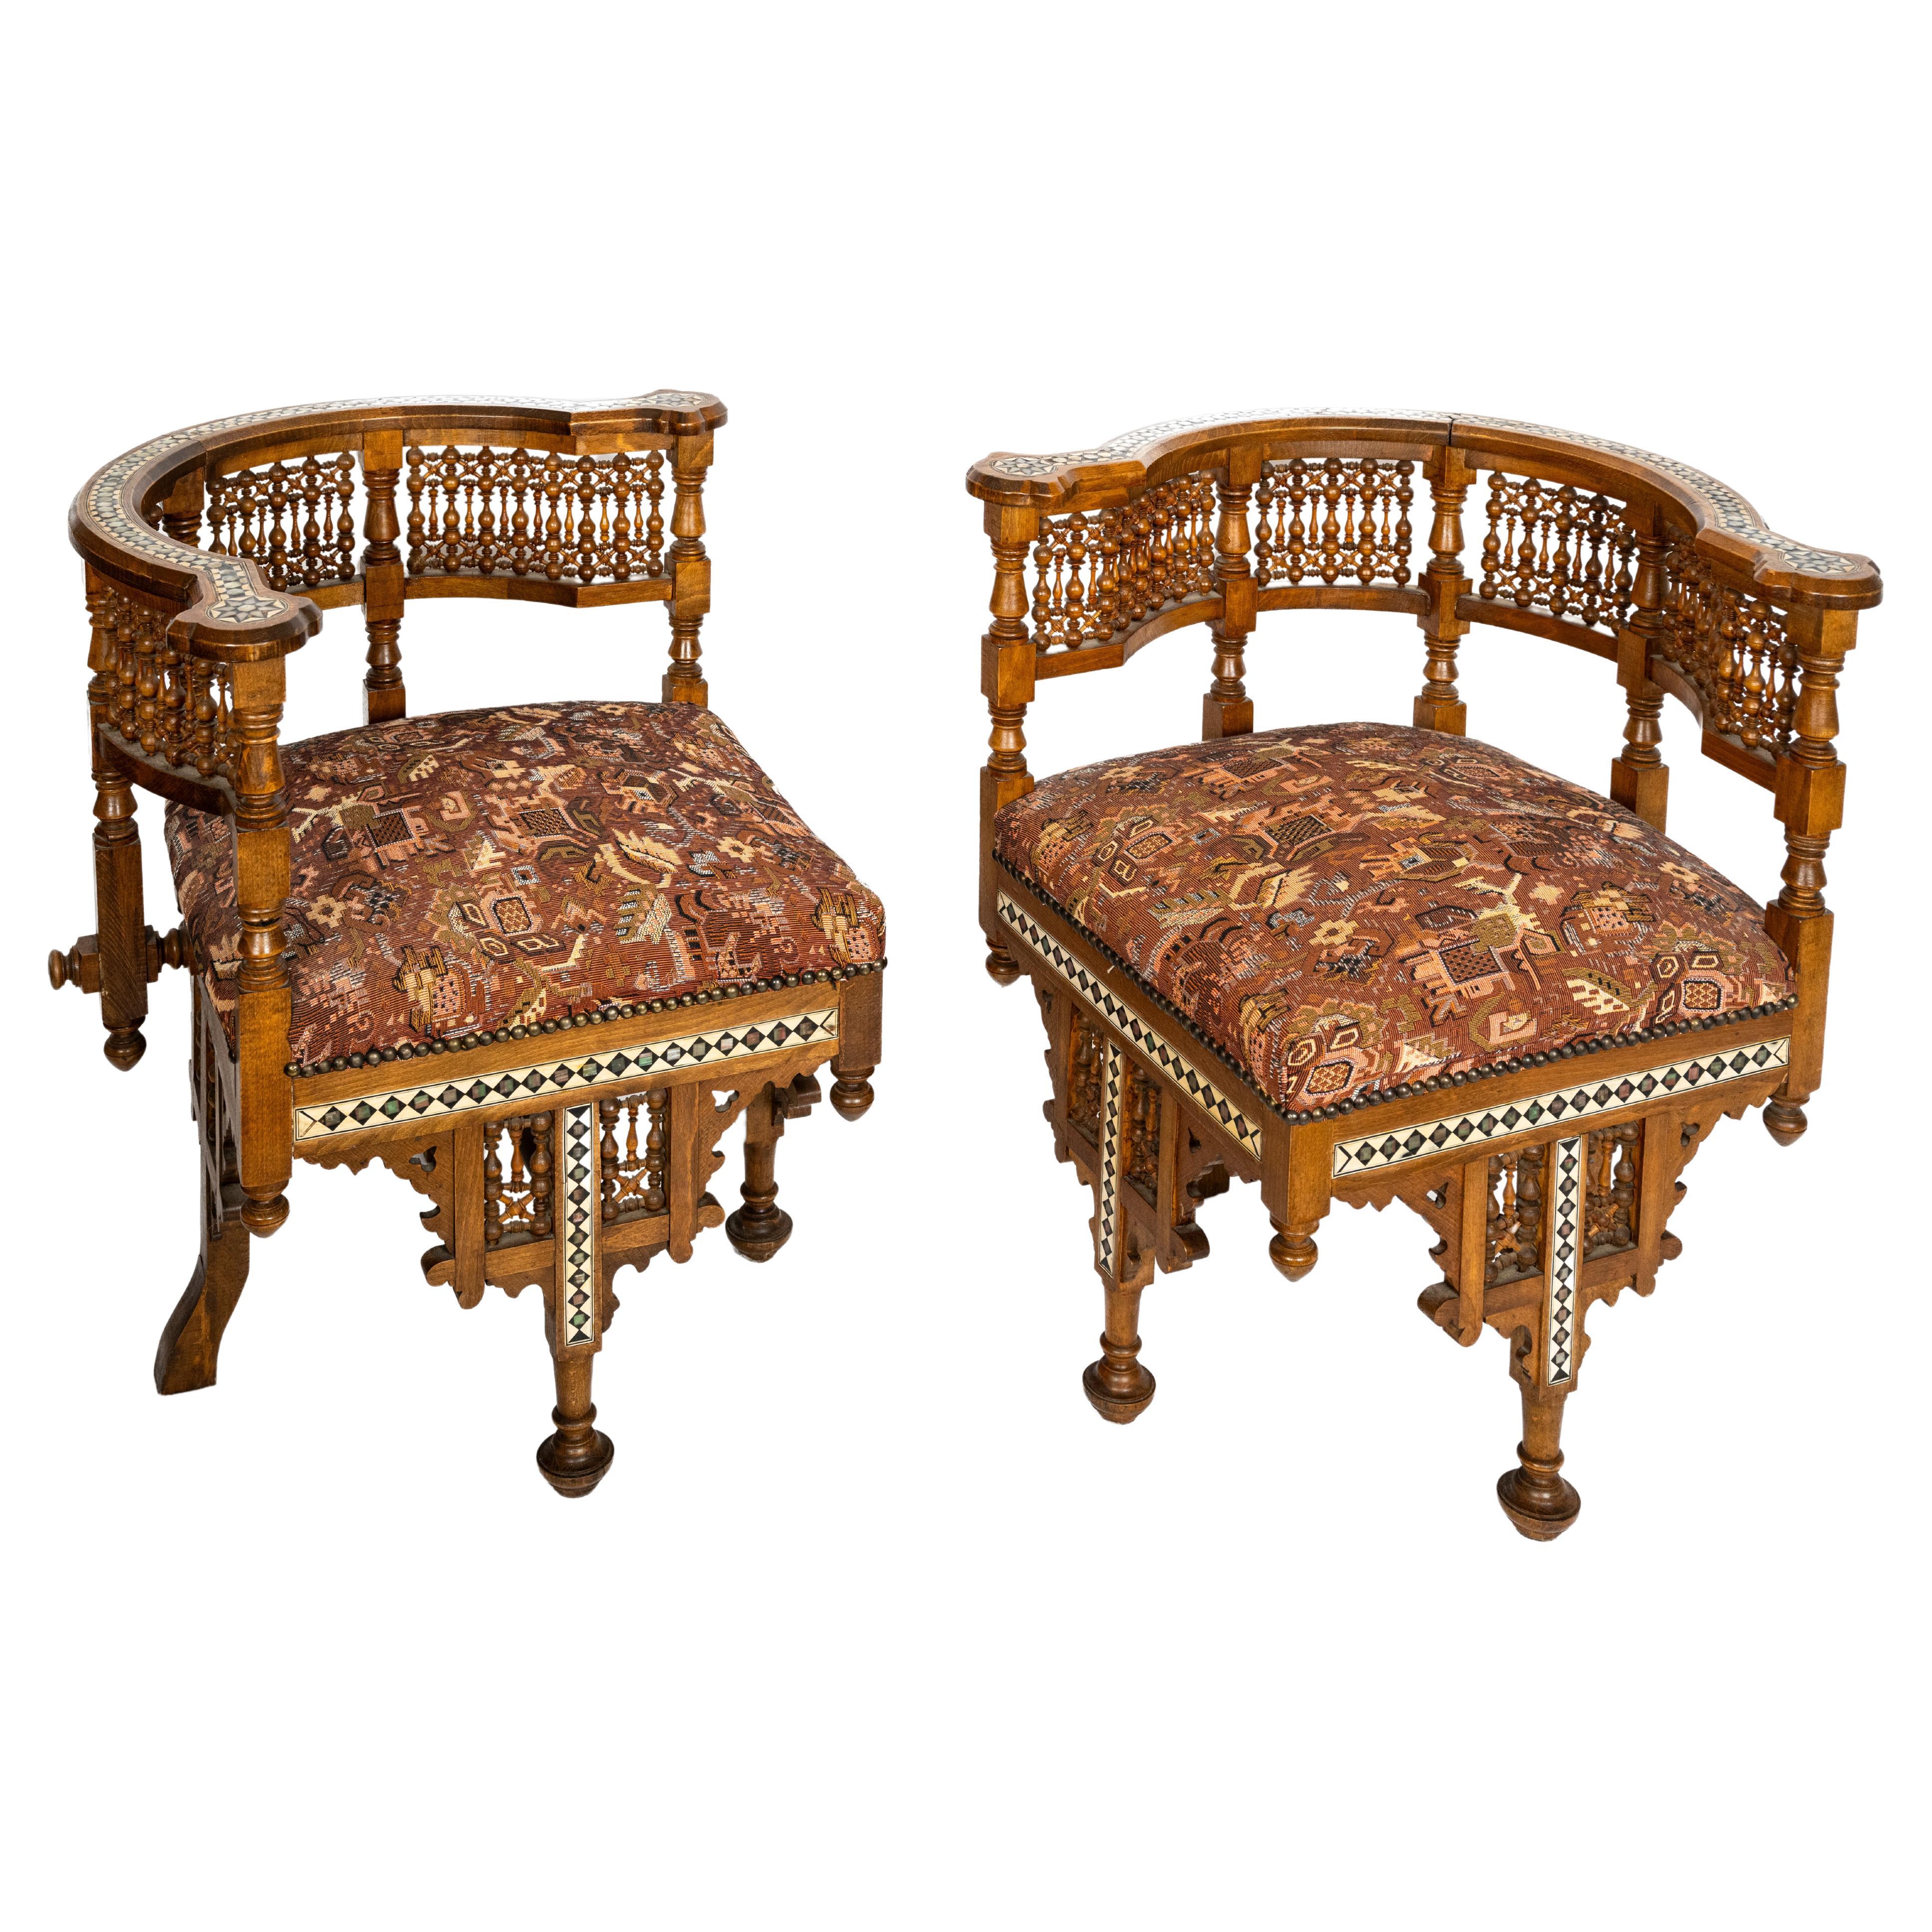 A Pair of Moorish-Style American Open Arm Chairs For Sale